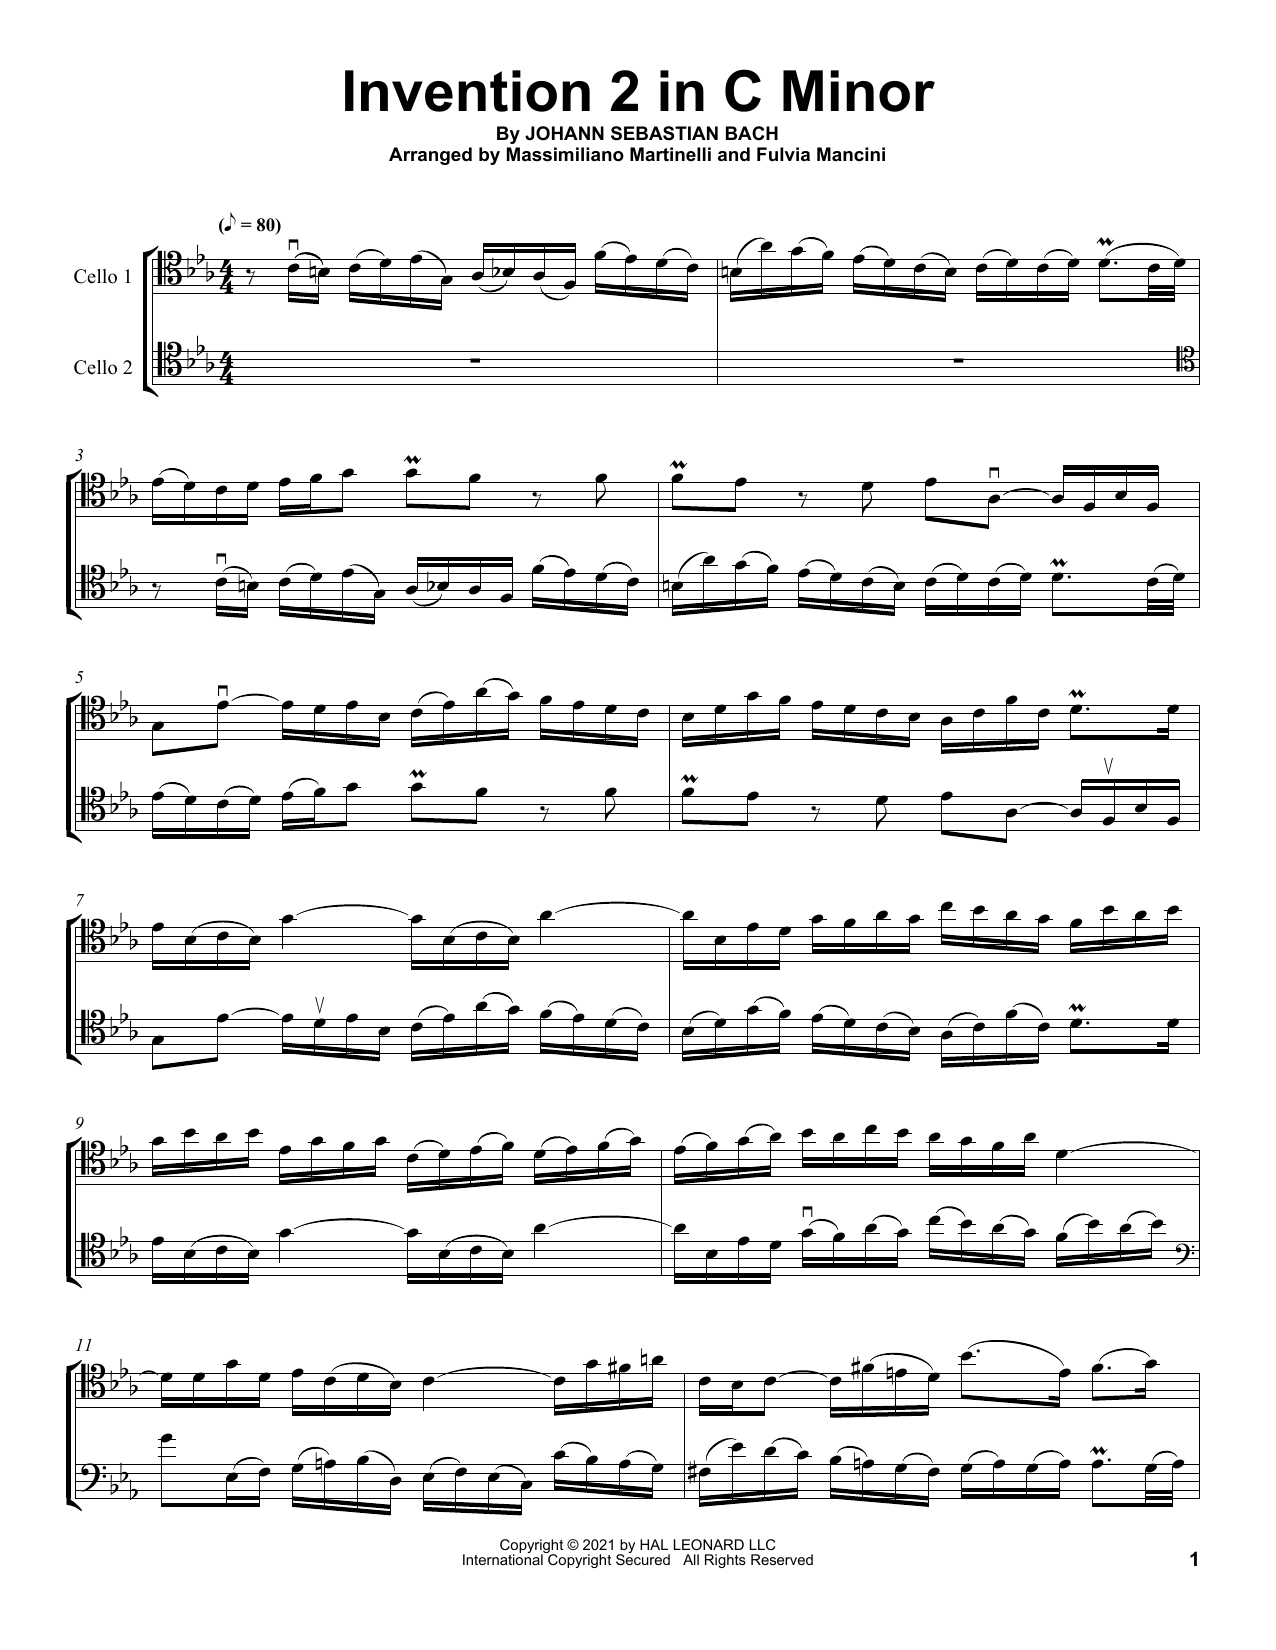 Download Mr & Mrs Cello Invention 2 In C Minor Sheet Music